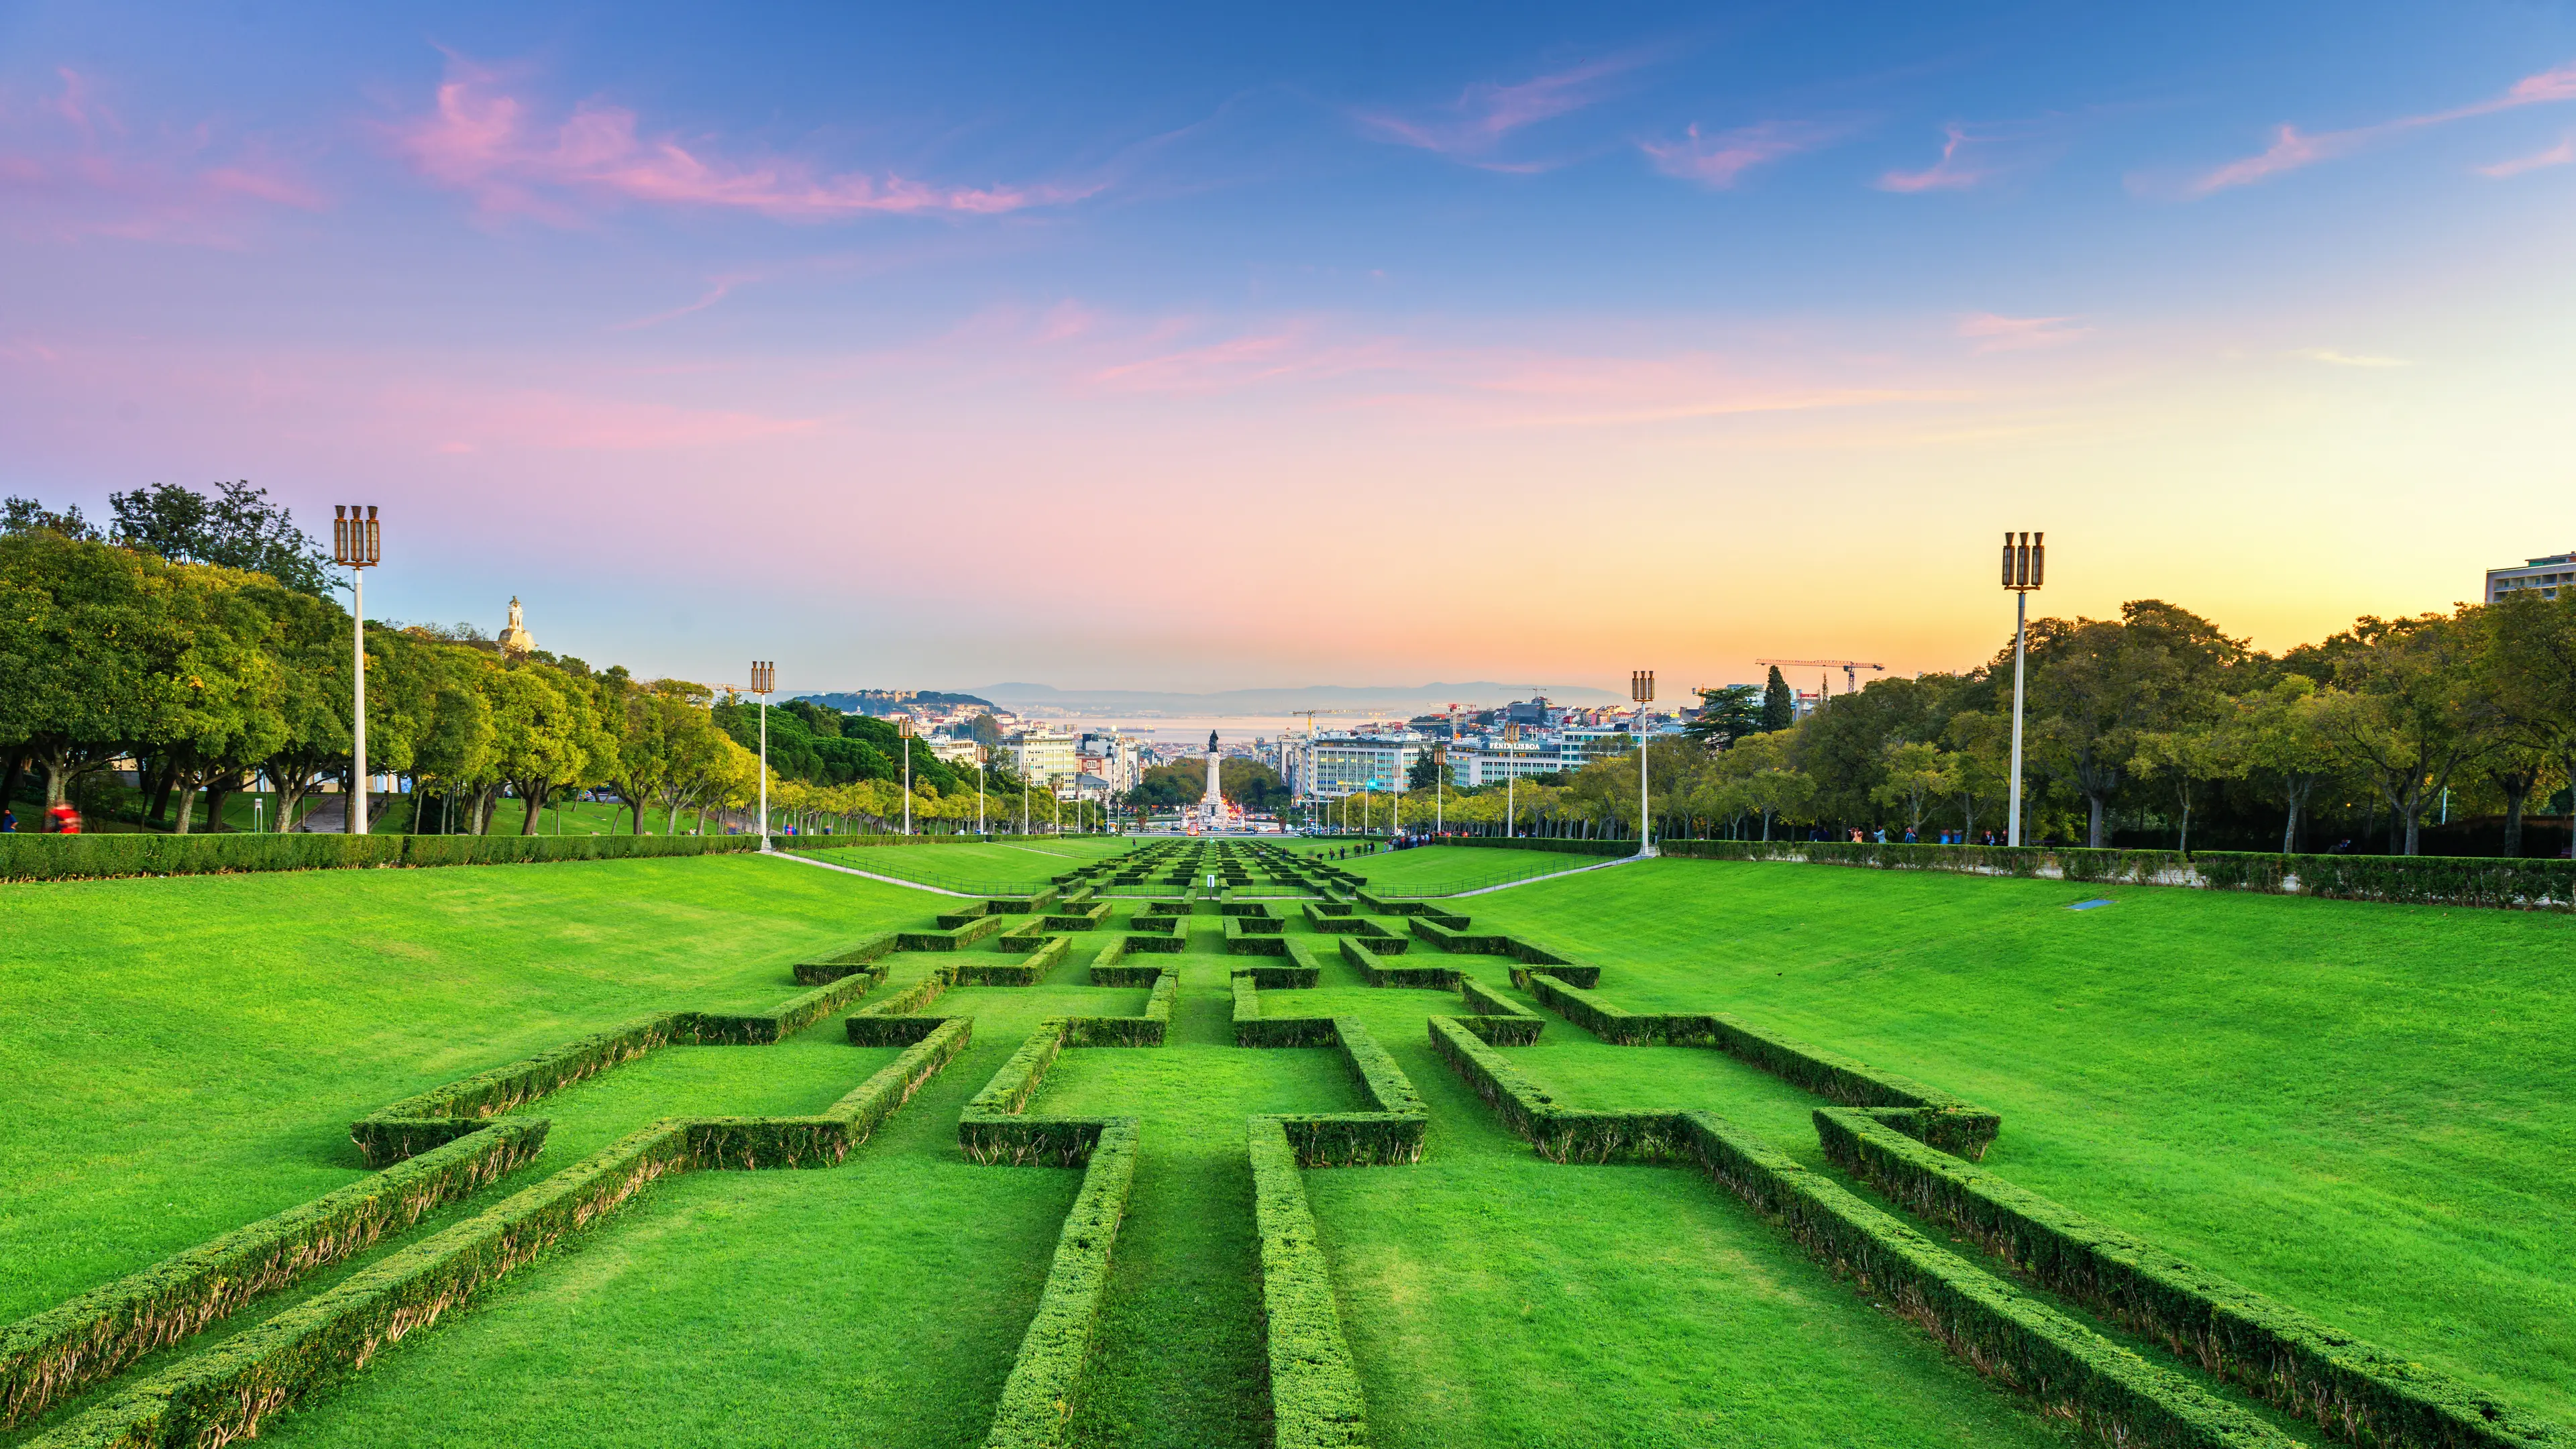 2-Day Family Sightseeing and Relaxation Itinerary in Lisbon, Portugal